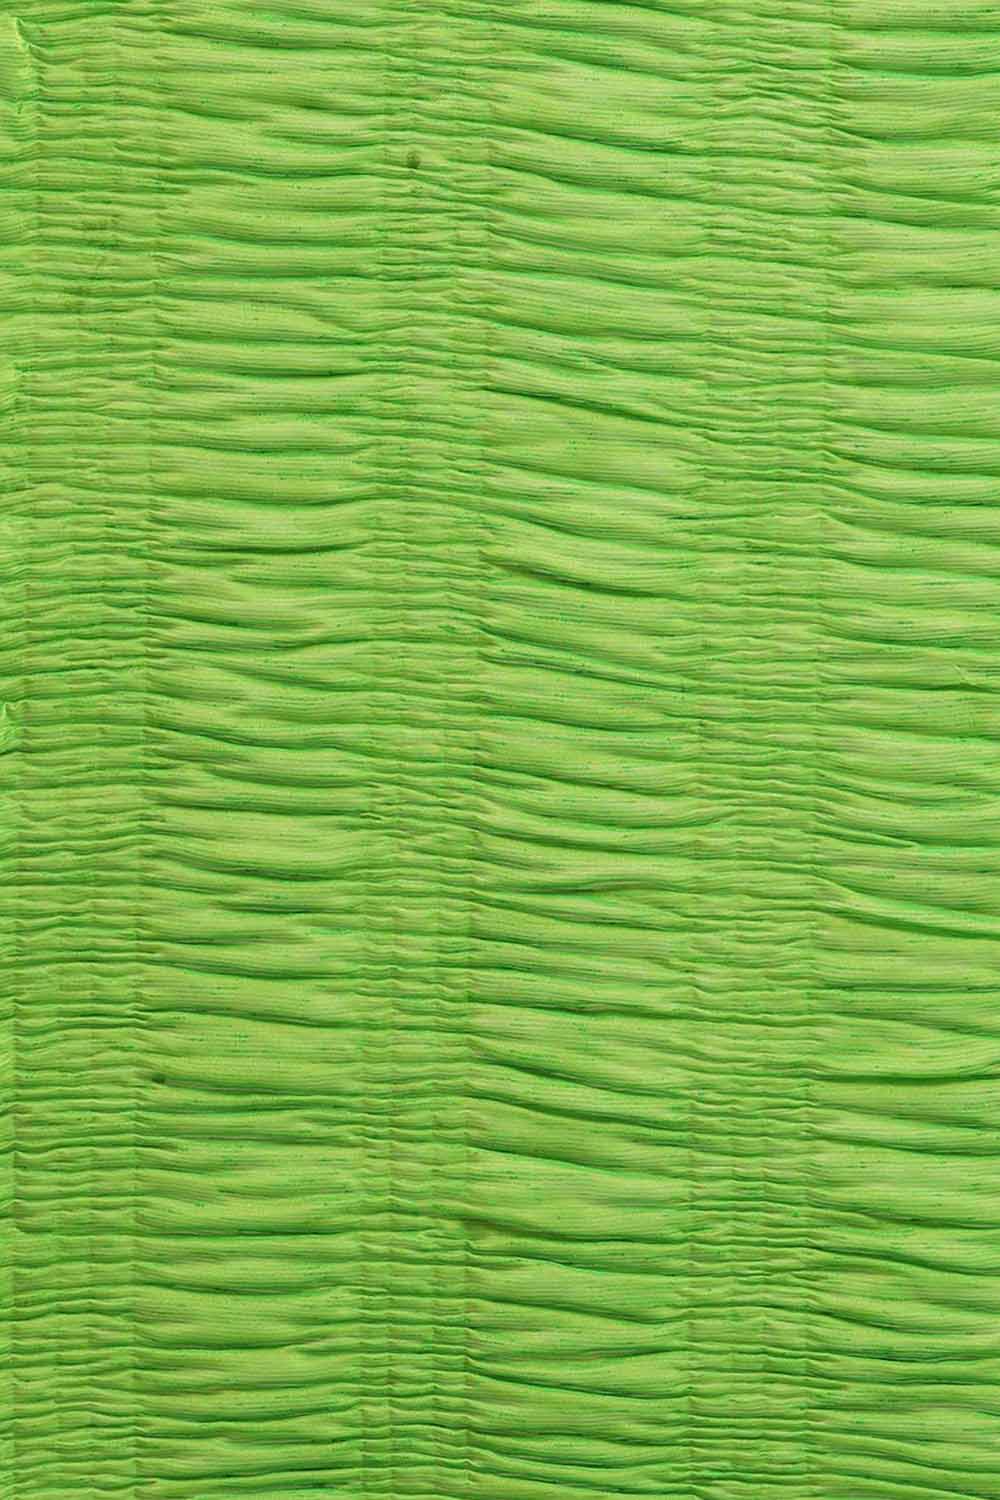 Buy Polycotton Solid Saree in Green Online - Zoom In